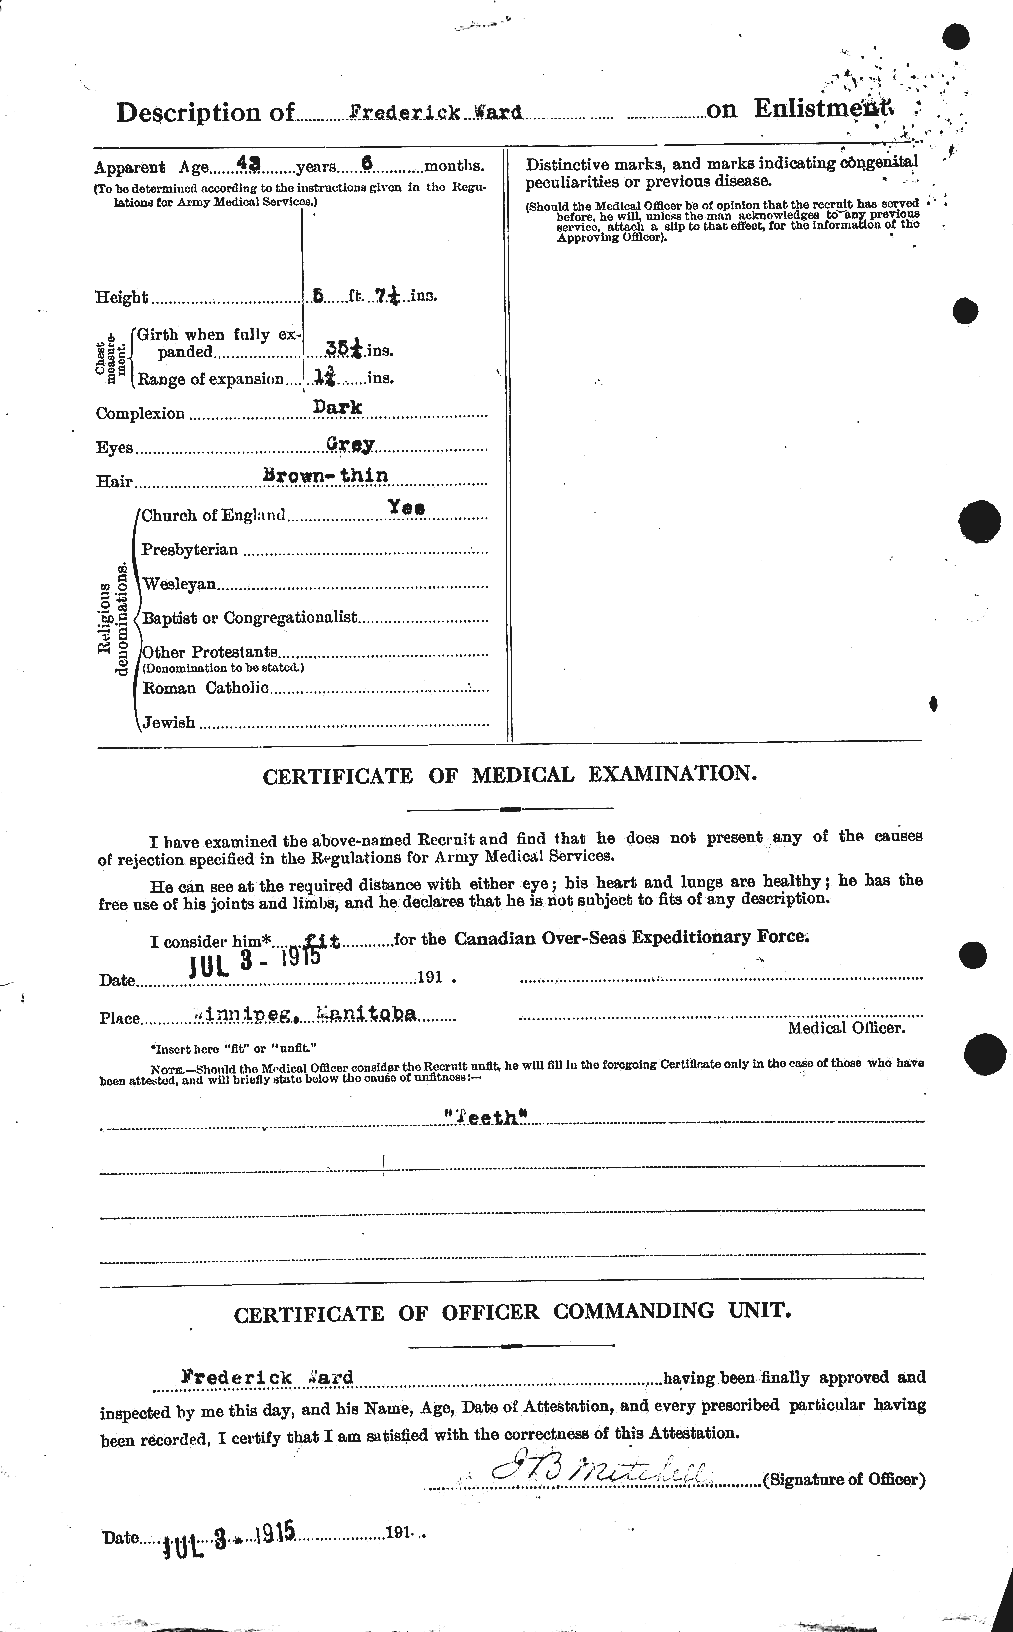 Personnel Records of the First World War - CEF 657711b